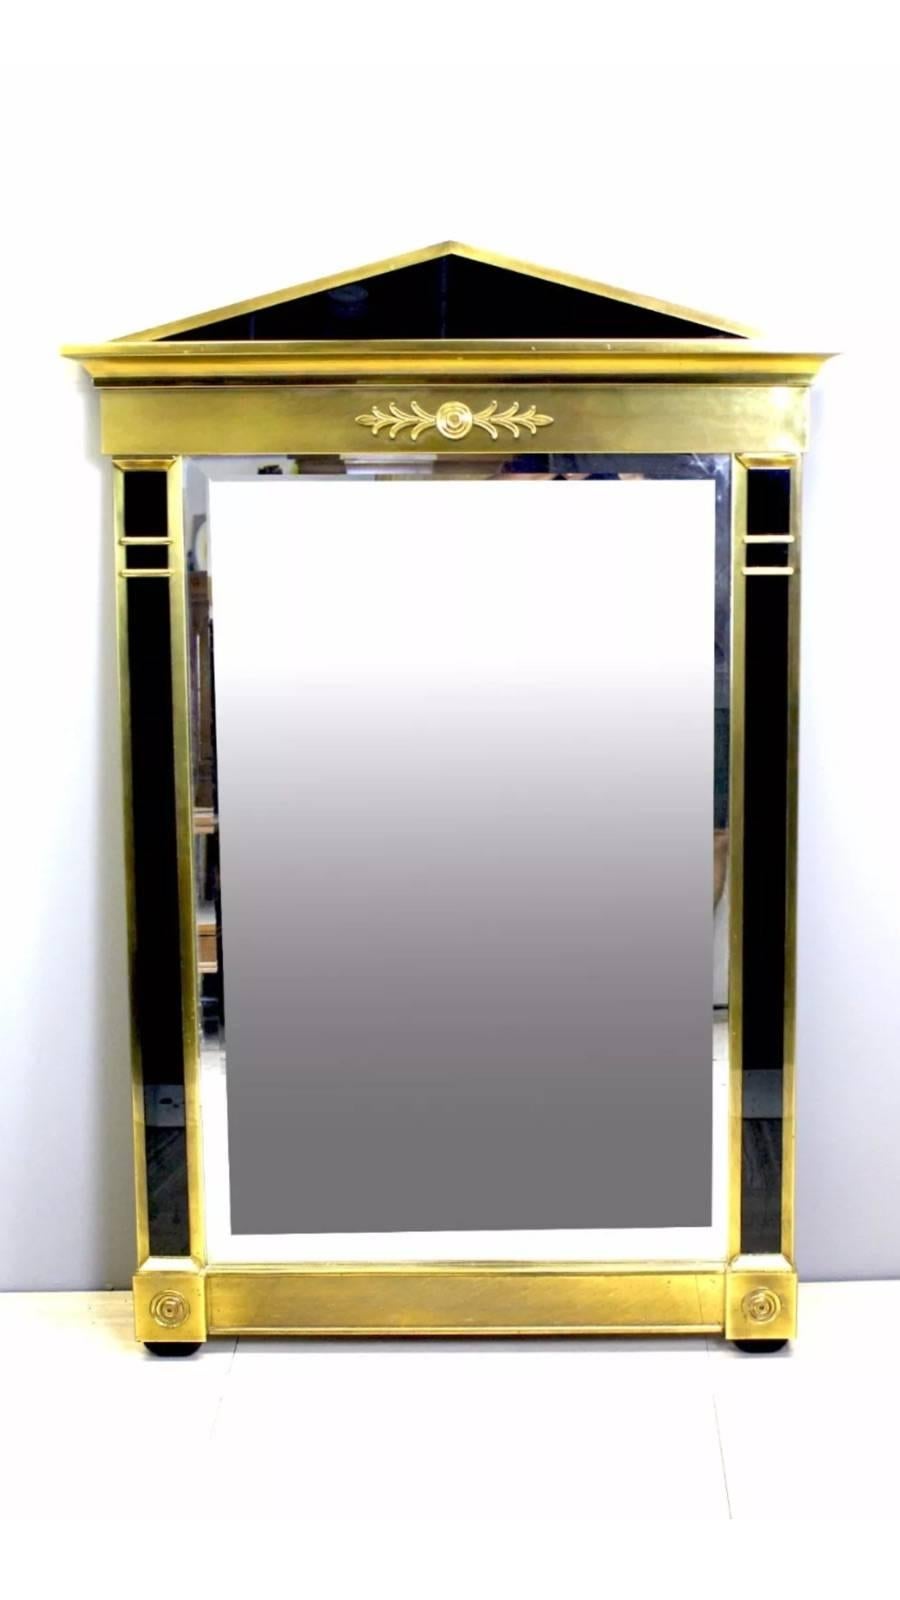 Substantial Mastercraft mirror Designed with solid brass and thick black Lucite with a beveled mirror. Designed in a Modern Empire style, circa 1970s-1980s.
  